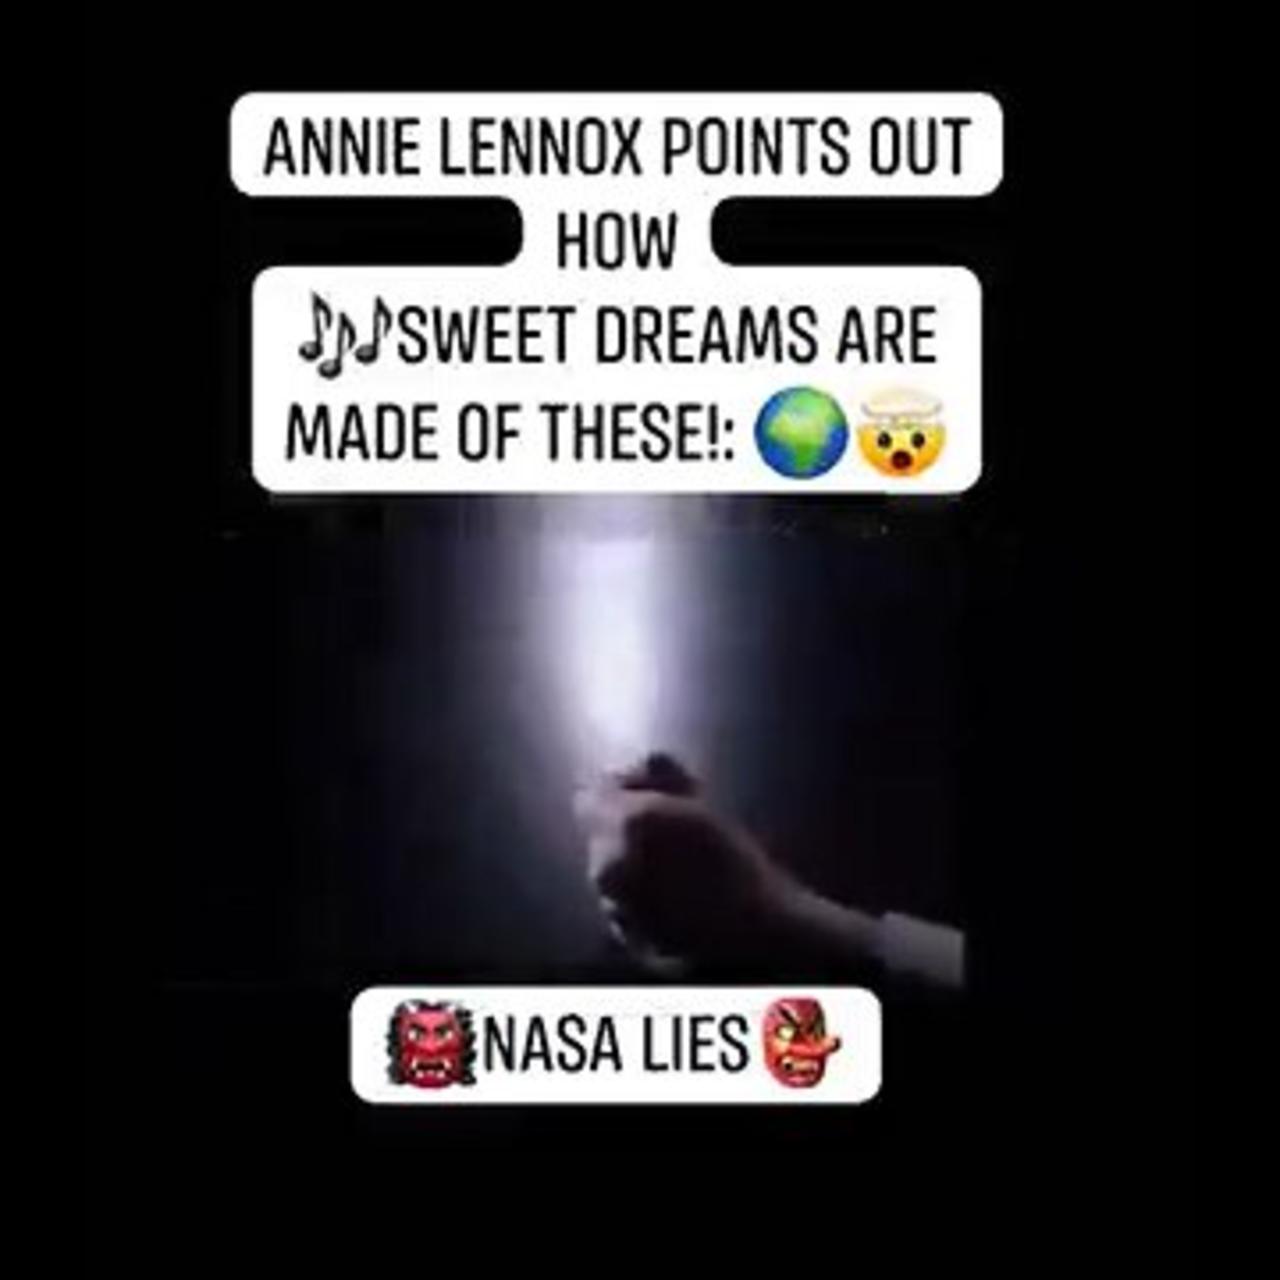 ANNIE LENNOX POINTS OUT HOW SWEET DREAMS ARE MADE OF THESE NASA LIES.